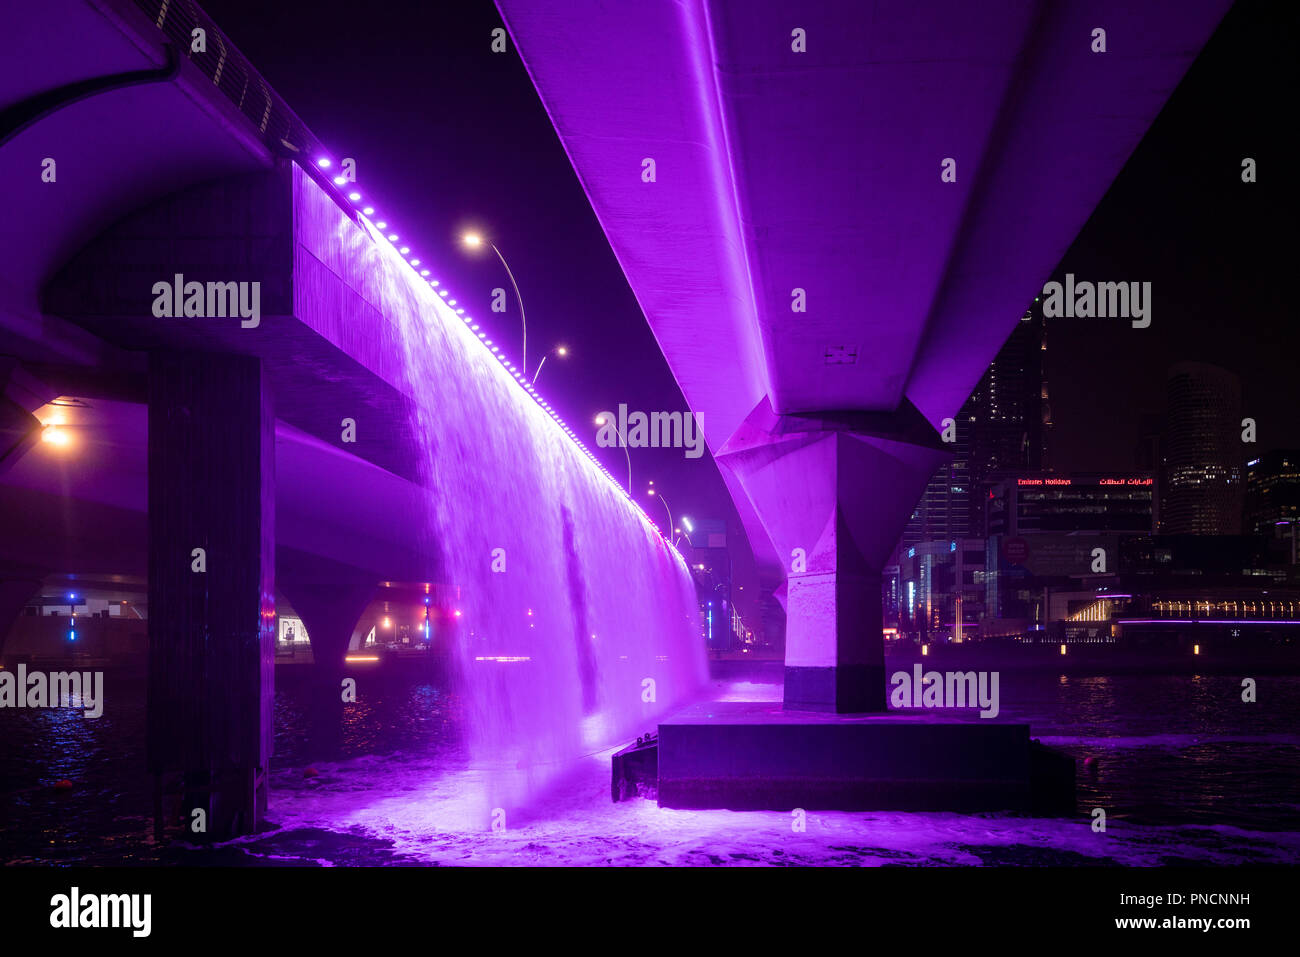 Illuminated waterfall from motorway bridge at night as part of the  Dubai Water Canal a waterway that connects into Dubai Creek and the sea. UAE, Stock Photo